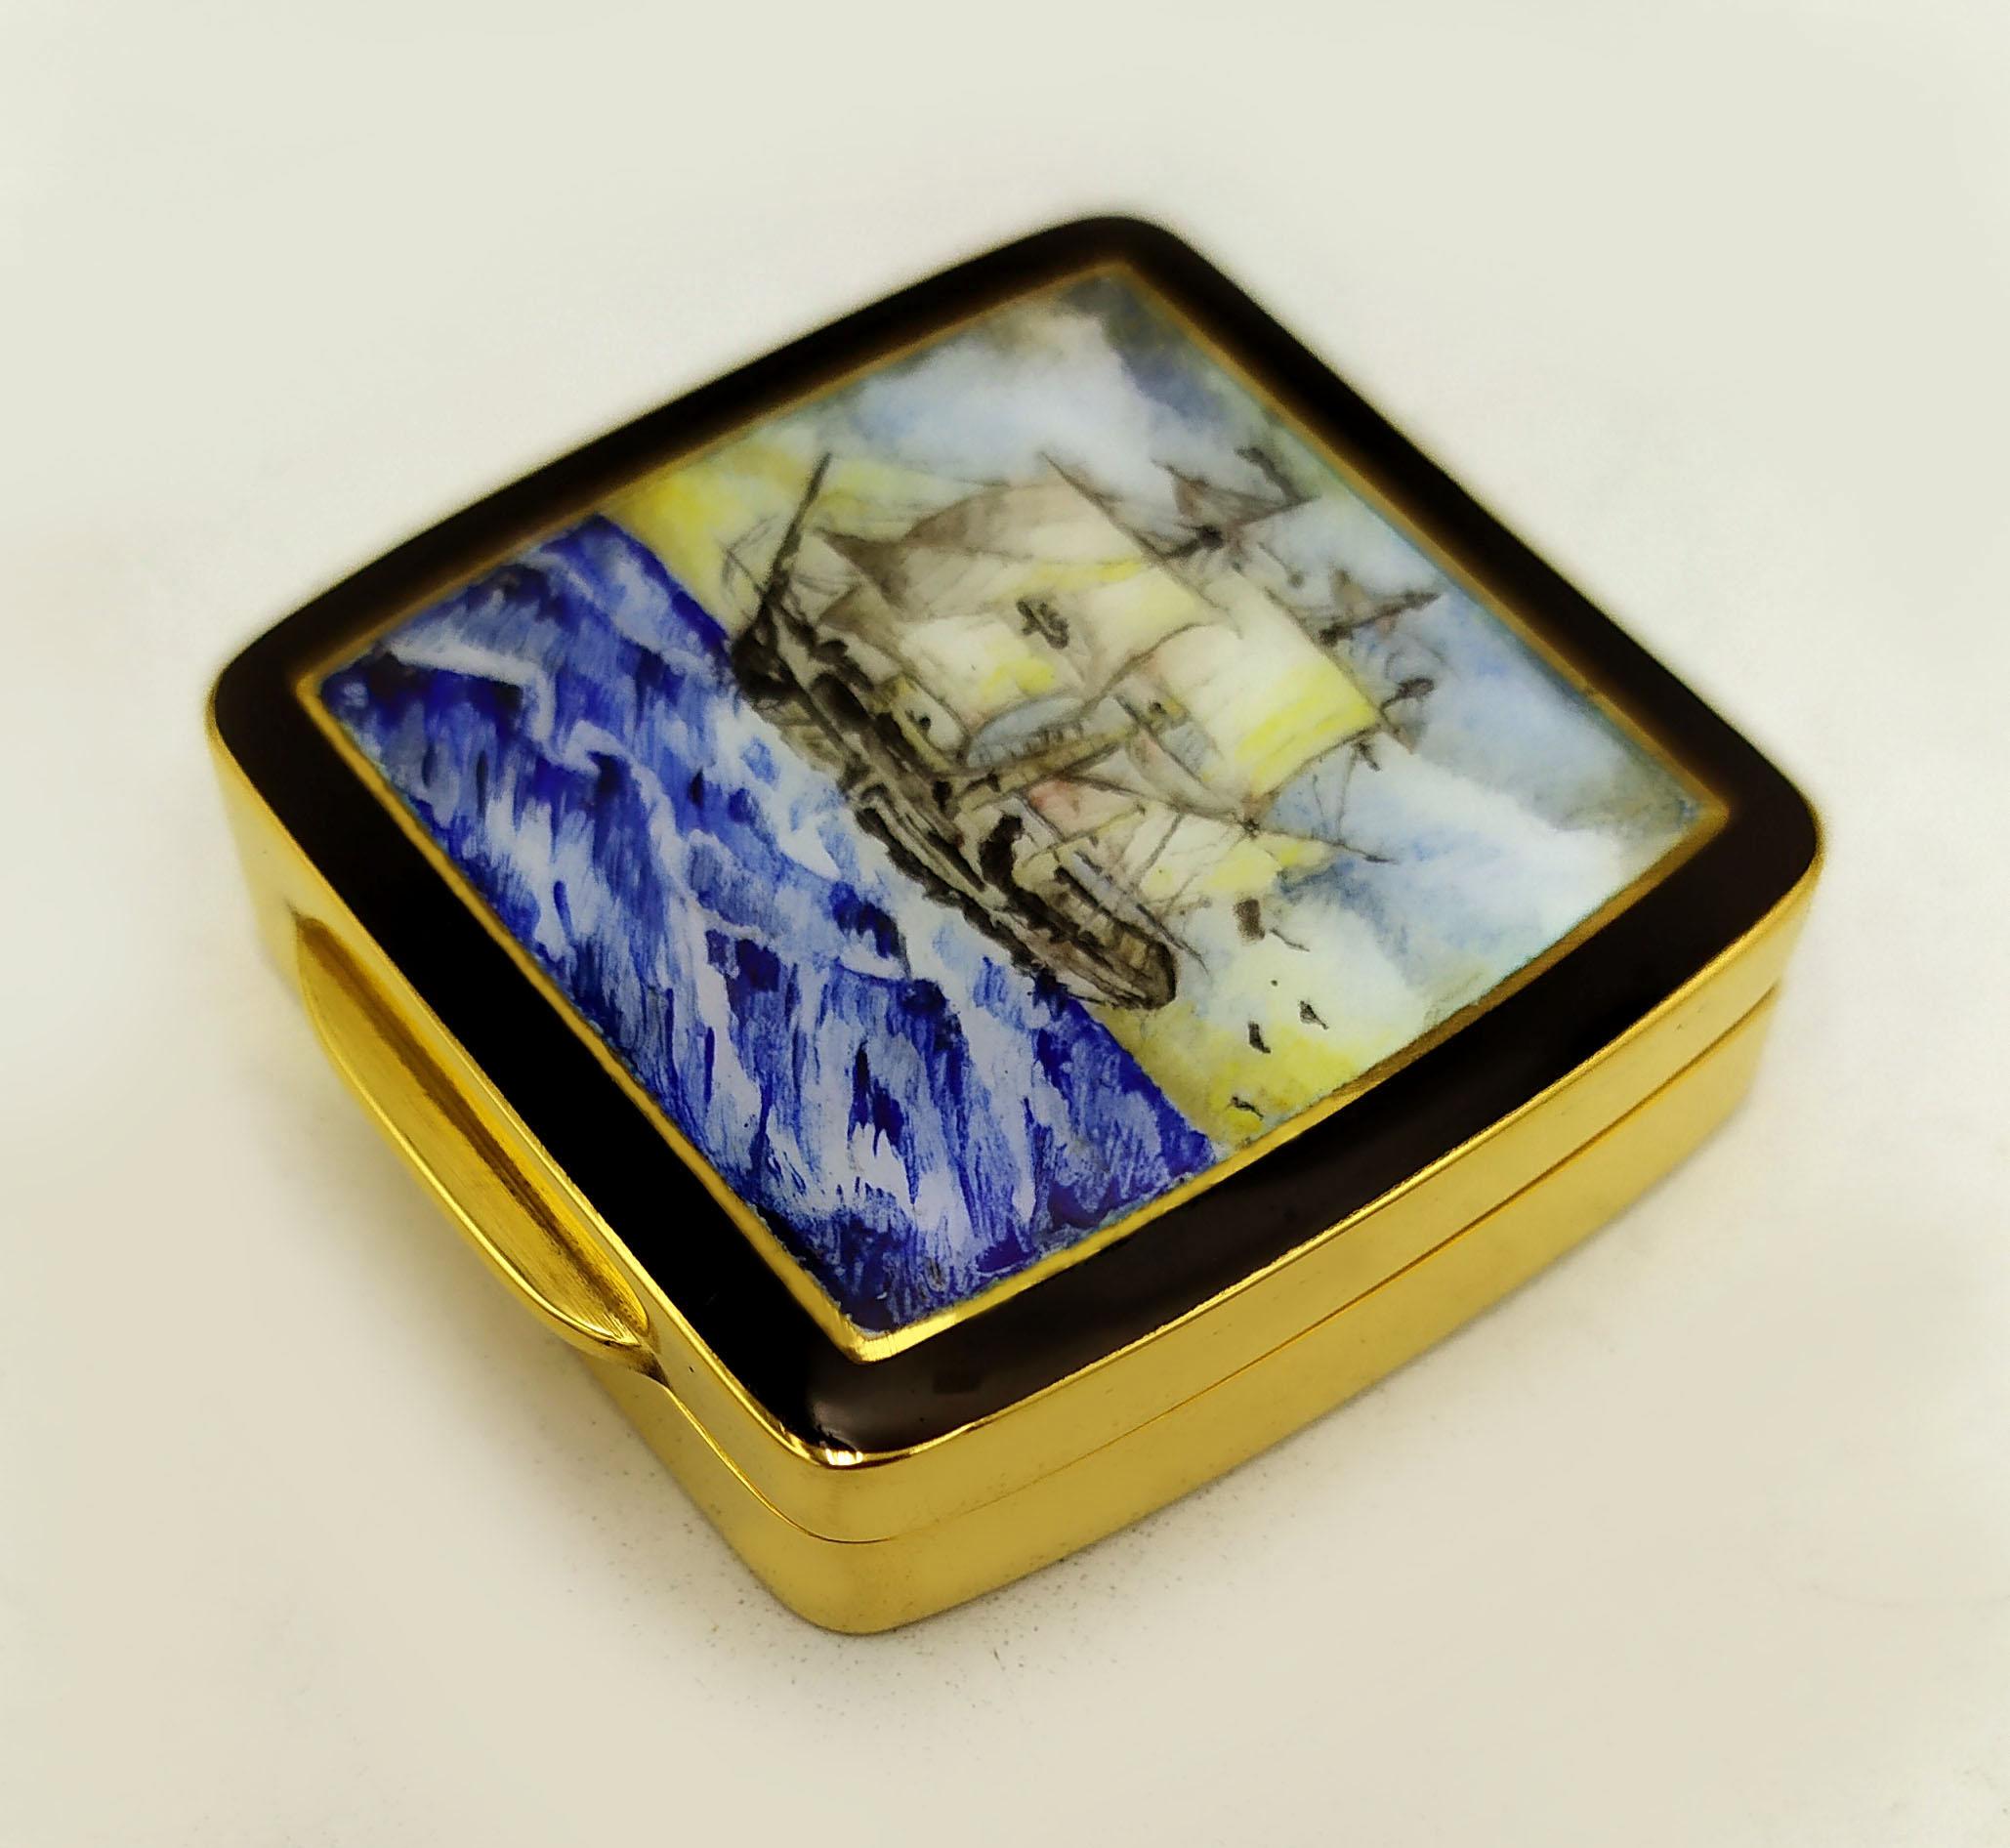 Pill Box Silver is rectangular with 2 slightly rounded sides.
Pill Box Silver Sterling Enamel Miniature Sailing Ship is in 925/1000 sterling silver gold plated 24carats.
Pill Box Silver is with translucent fired enamels on guilloché.
Pill Box Silver